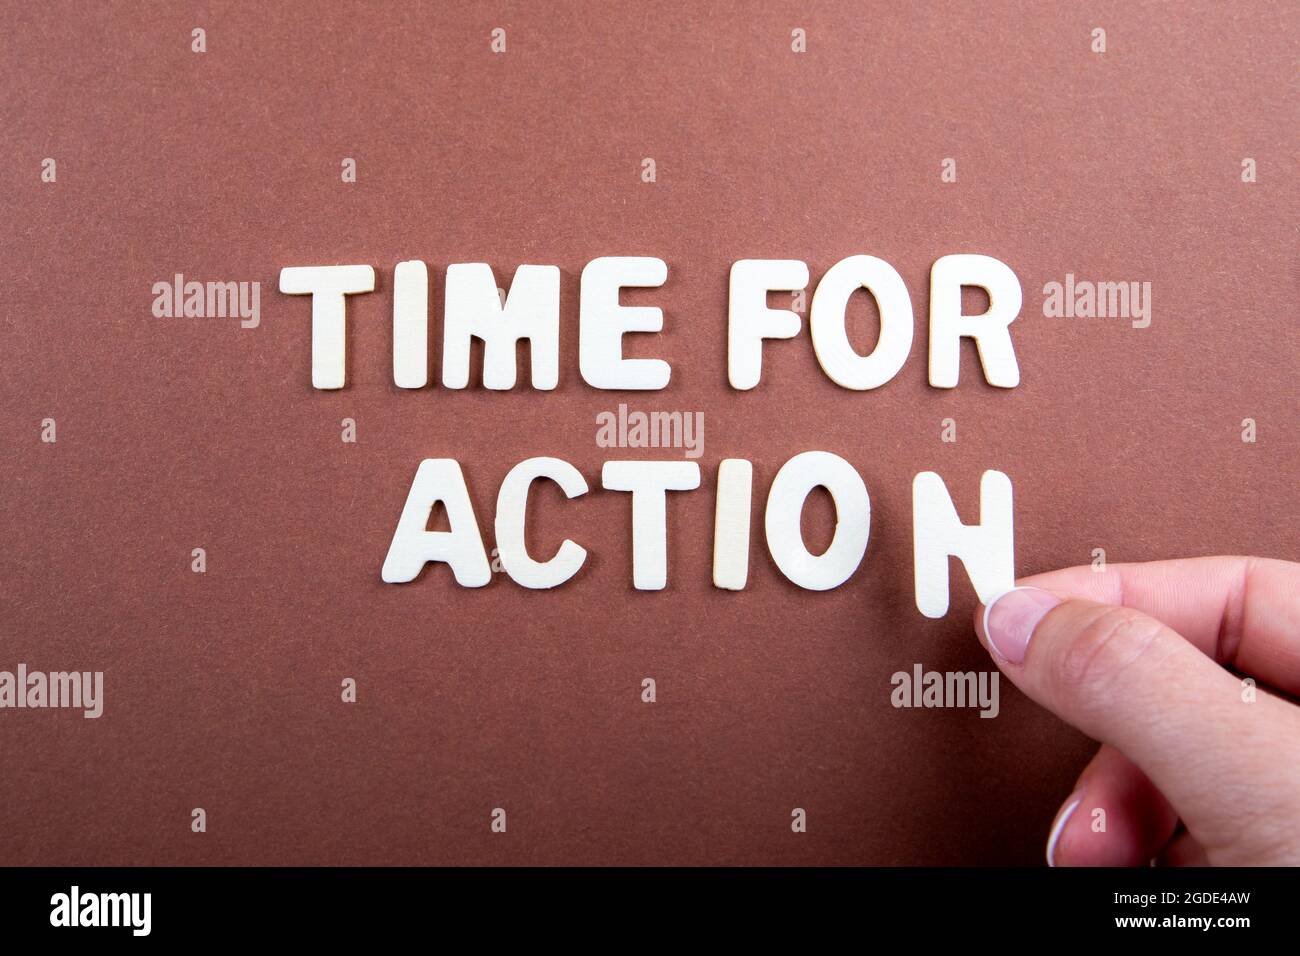 Time For Action. White wooden letters with text on a brown background. Stock Photo